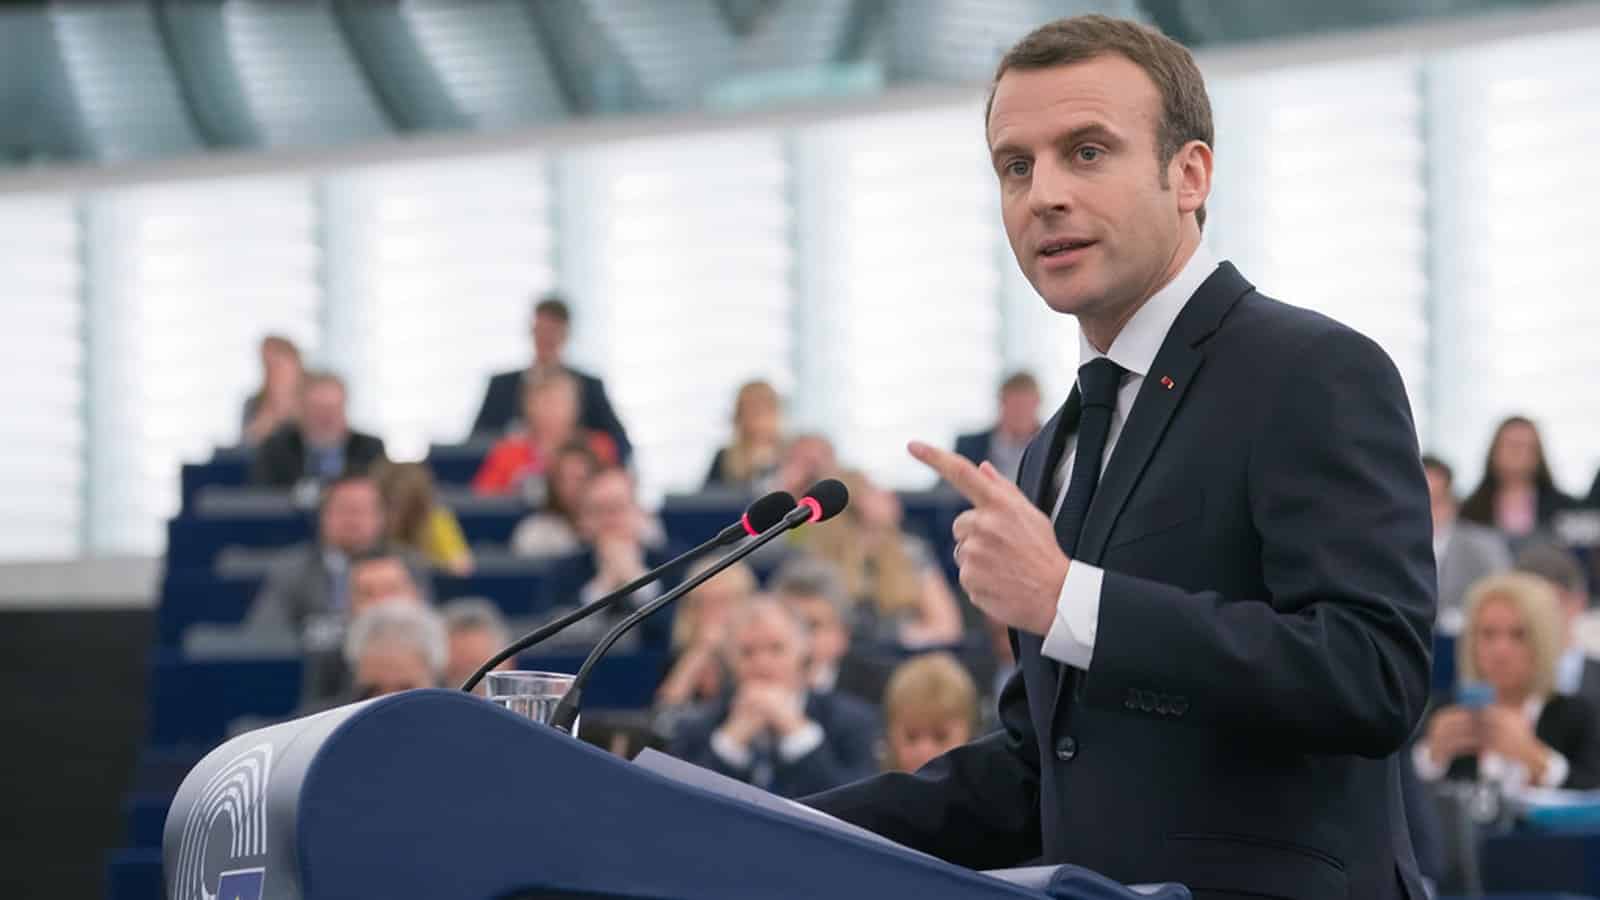 French Presidential candidate Emmanuel Macron